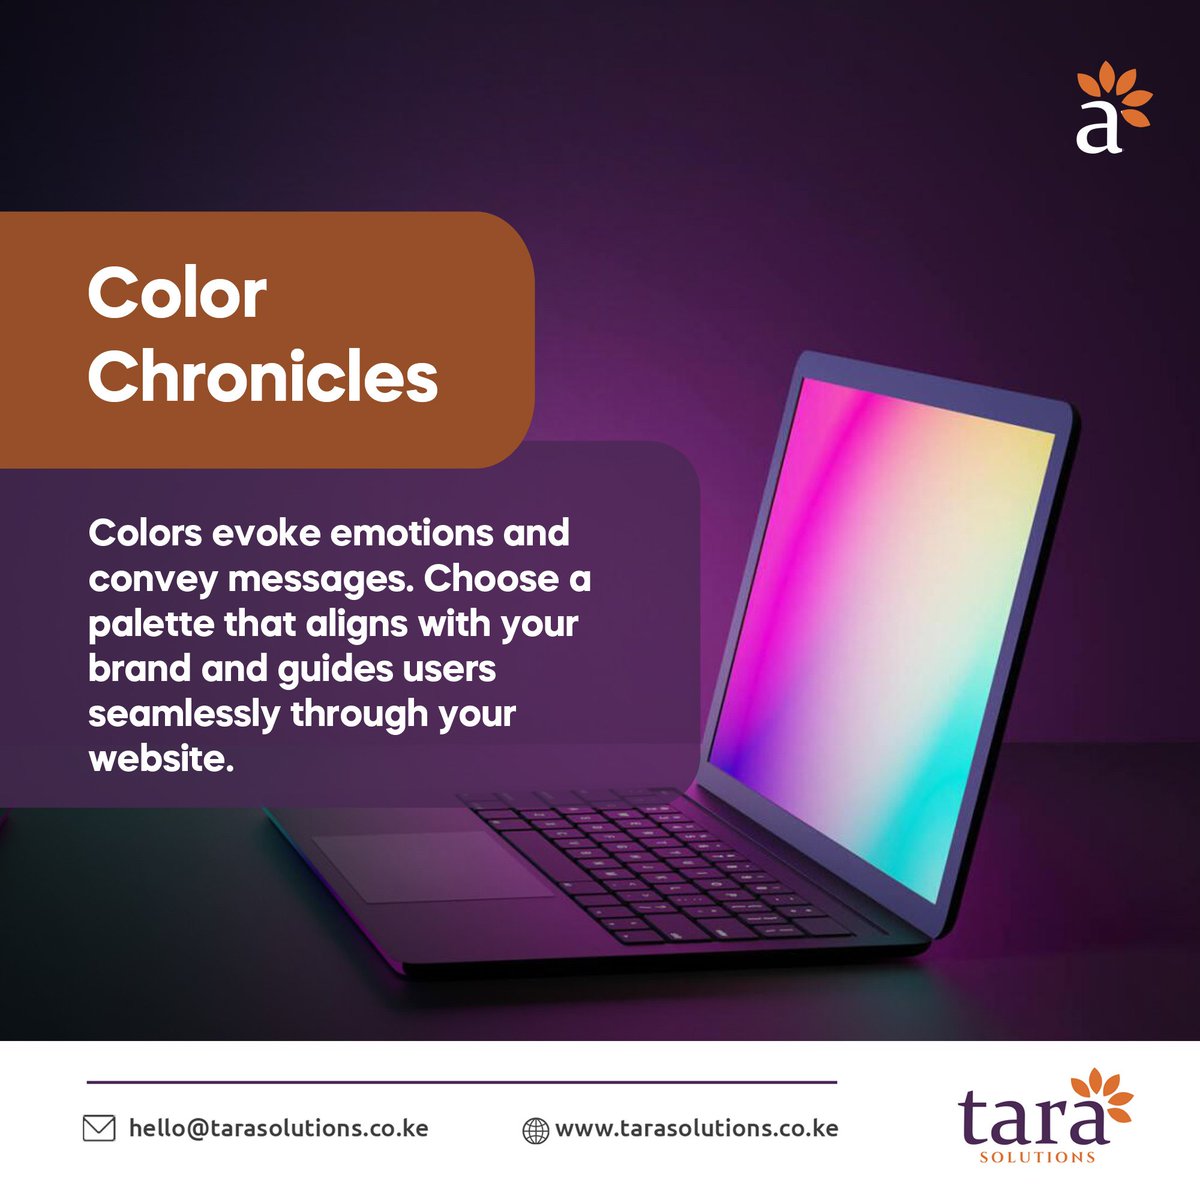 Colors are the backdrop of a brands vision. Using them right ensures the story and message is clearly communicated. This is especially true in website design. 

#websitedesign #colorpsychology #softwaredevelopment #website #websitedesigner #wealwaysfindaway